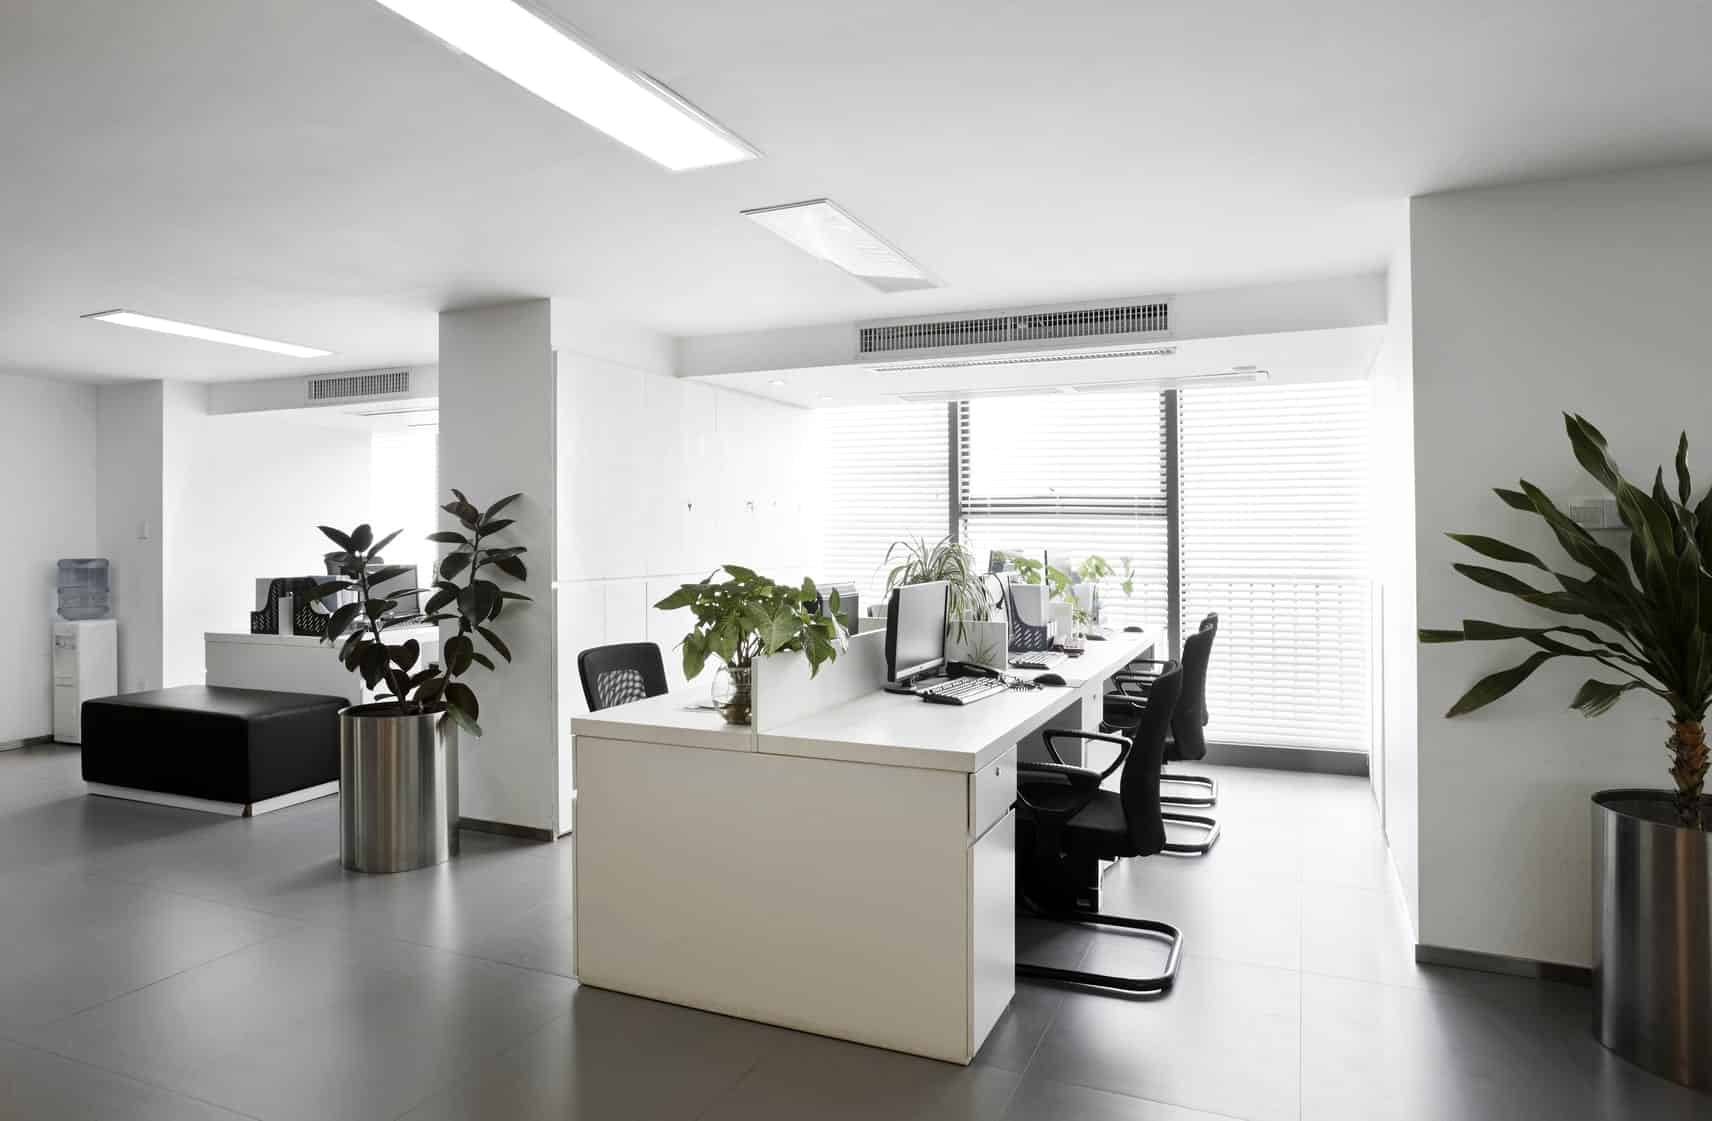 Should You Buy or Lease Your Small Business Office Space?